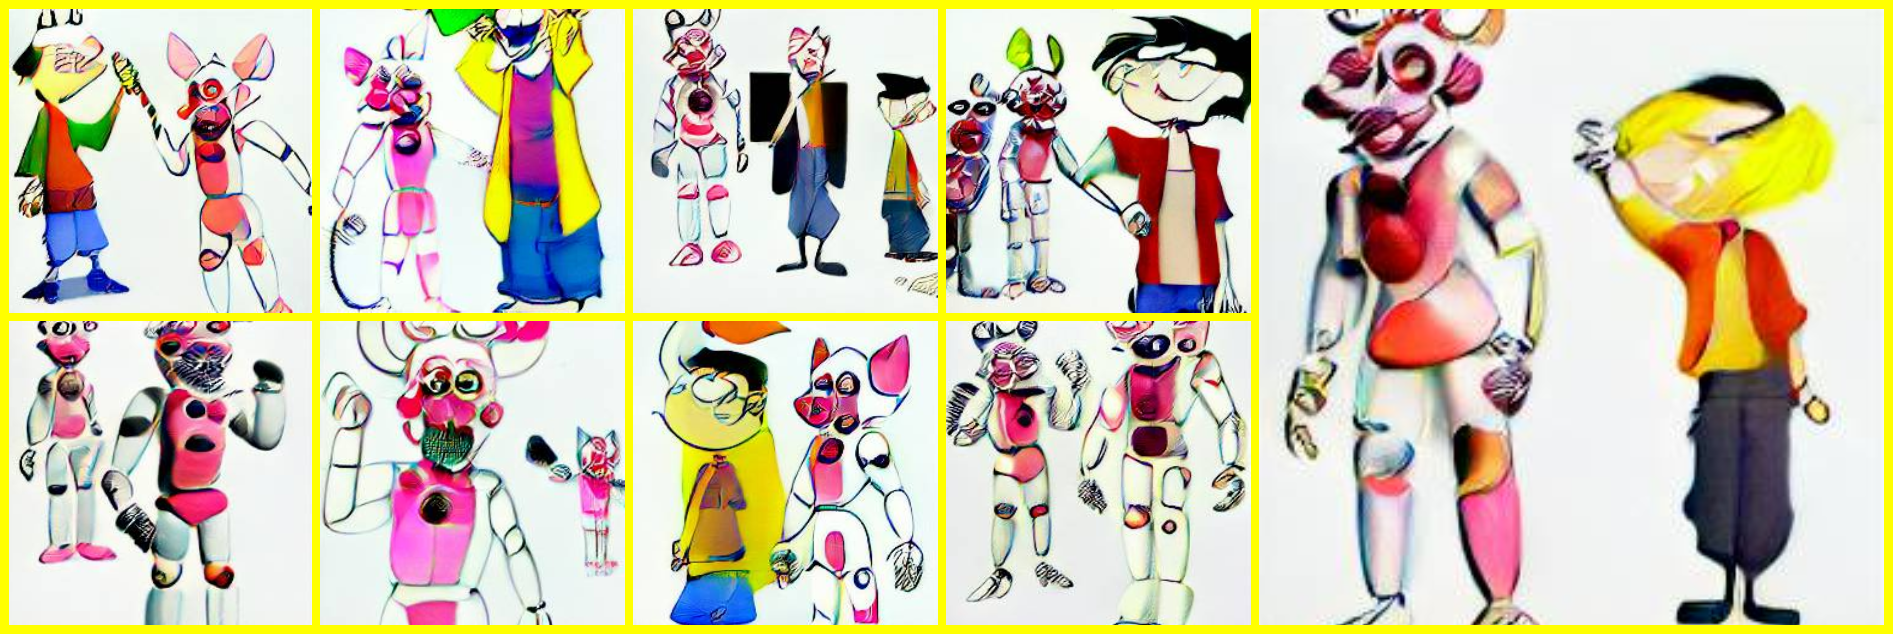 The Tails doll.exe and the 3rd reality ed dolls by mangle40211 on DeviantArt